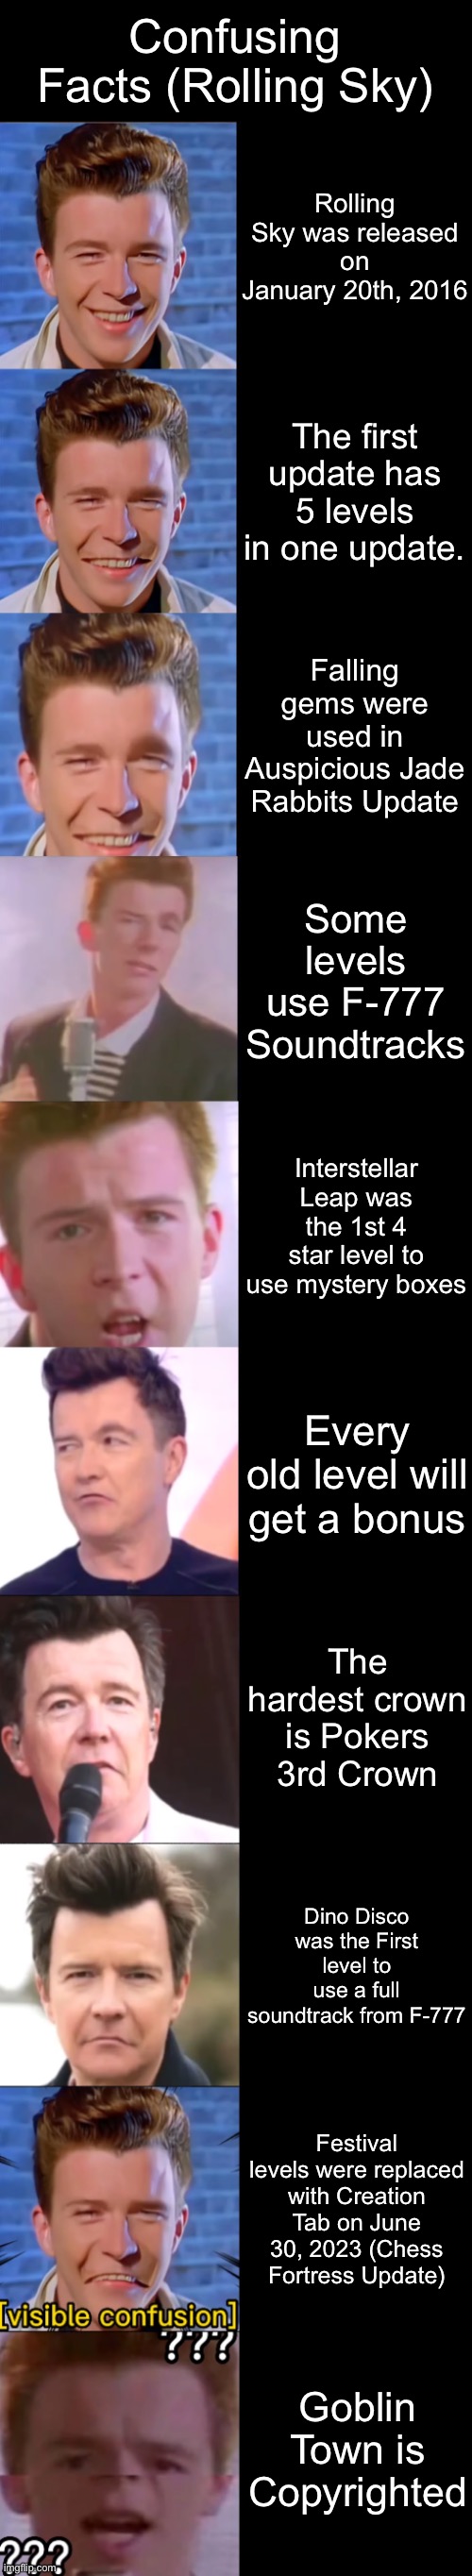 Rick Astley Becoming Confused (Rolling Sky’s Confusing Facts) | Confusing Facts (Rolling Sky); Rolling Sky was released on January 20th, 2016; The first update has 5 levels in one update. Falling gems were used in Auspicious Jade Rabbits Update; Some levels use F-777 Soundtracks; Interstellar Leap was the 1st 4 star level to use mystery boxes; Every old level will get a bonus; The hardest crown is Pokers 3rd Crown; Dino Disco was the First level to use a full soundtrack from F-777; Festival levels were replaced with Creation Tab on June 30, 2023 (Chess Fortress Update); Goblin Town is Copyrighted | image tagged in rick astley becoming confused,rolling sky | made w/ Imgflip meme maker